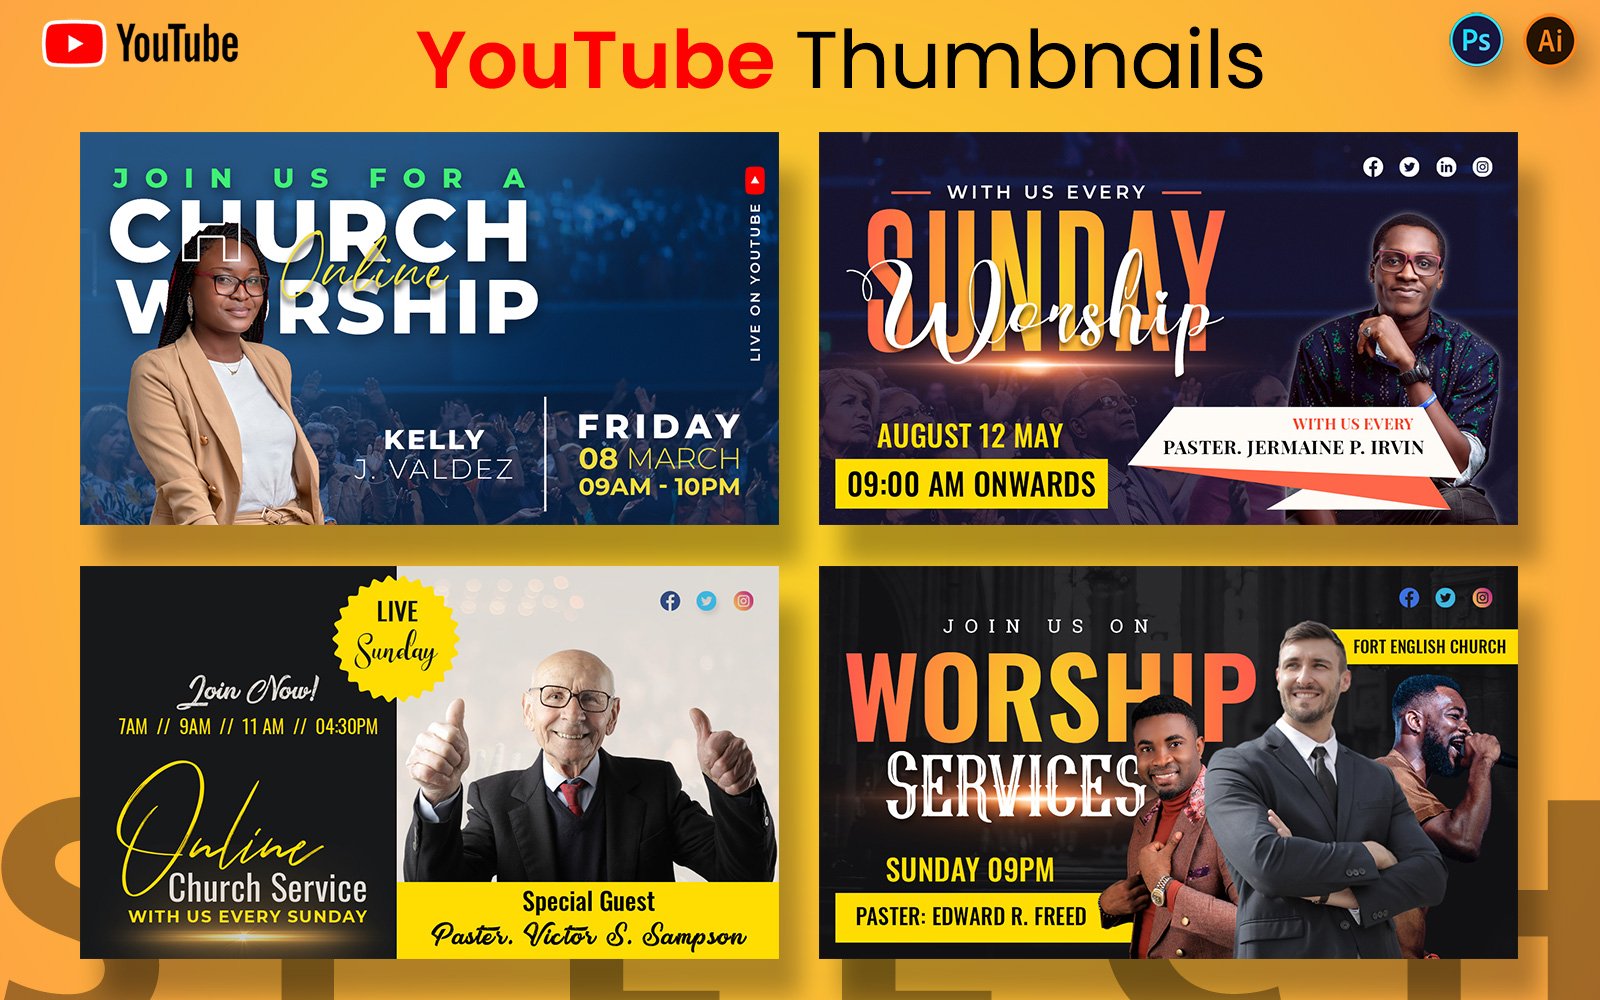 Church Speech Youtube Thumbnails - Creative Youtube Thumbnail and Cover Designs